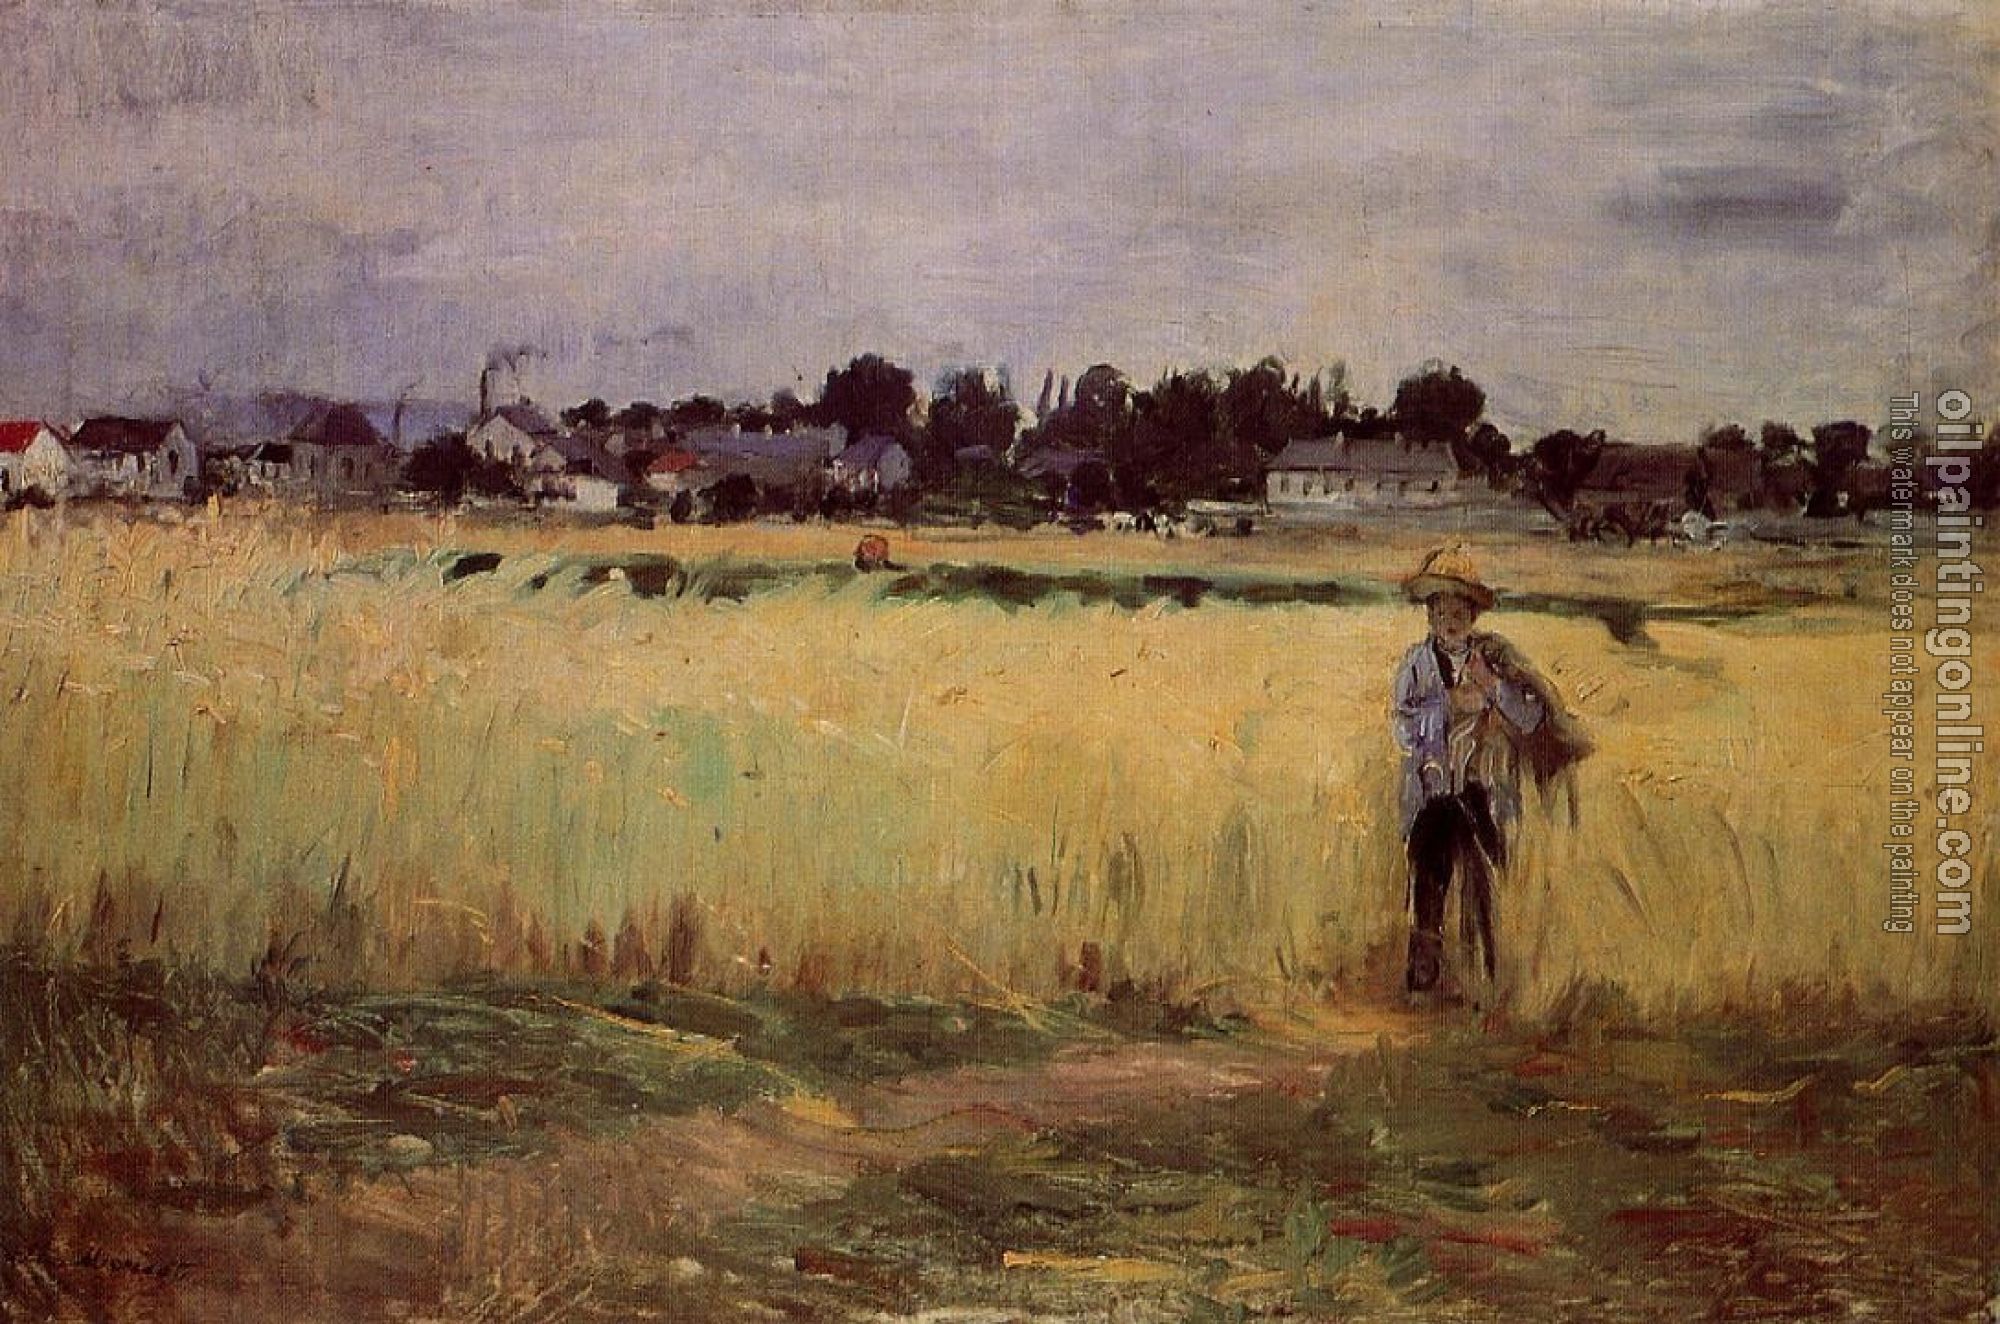 Morisot, Berthe - In the Wheat Fields at Gennevilliers